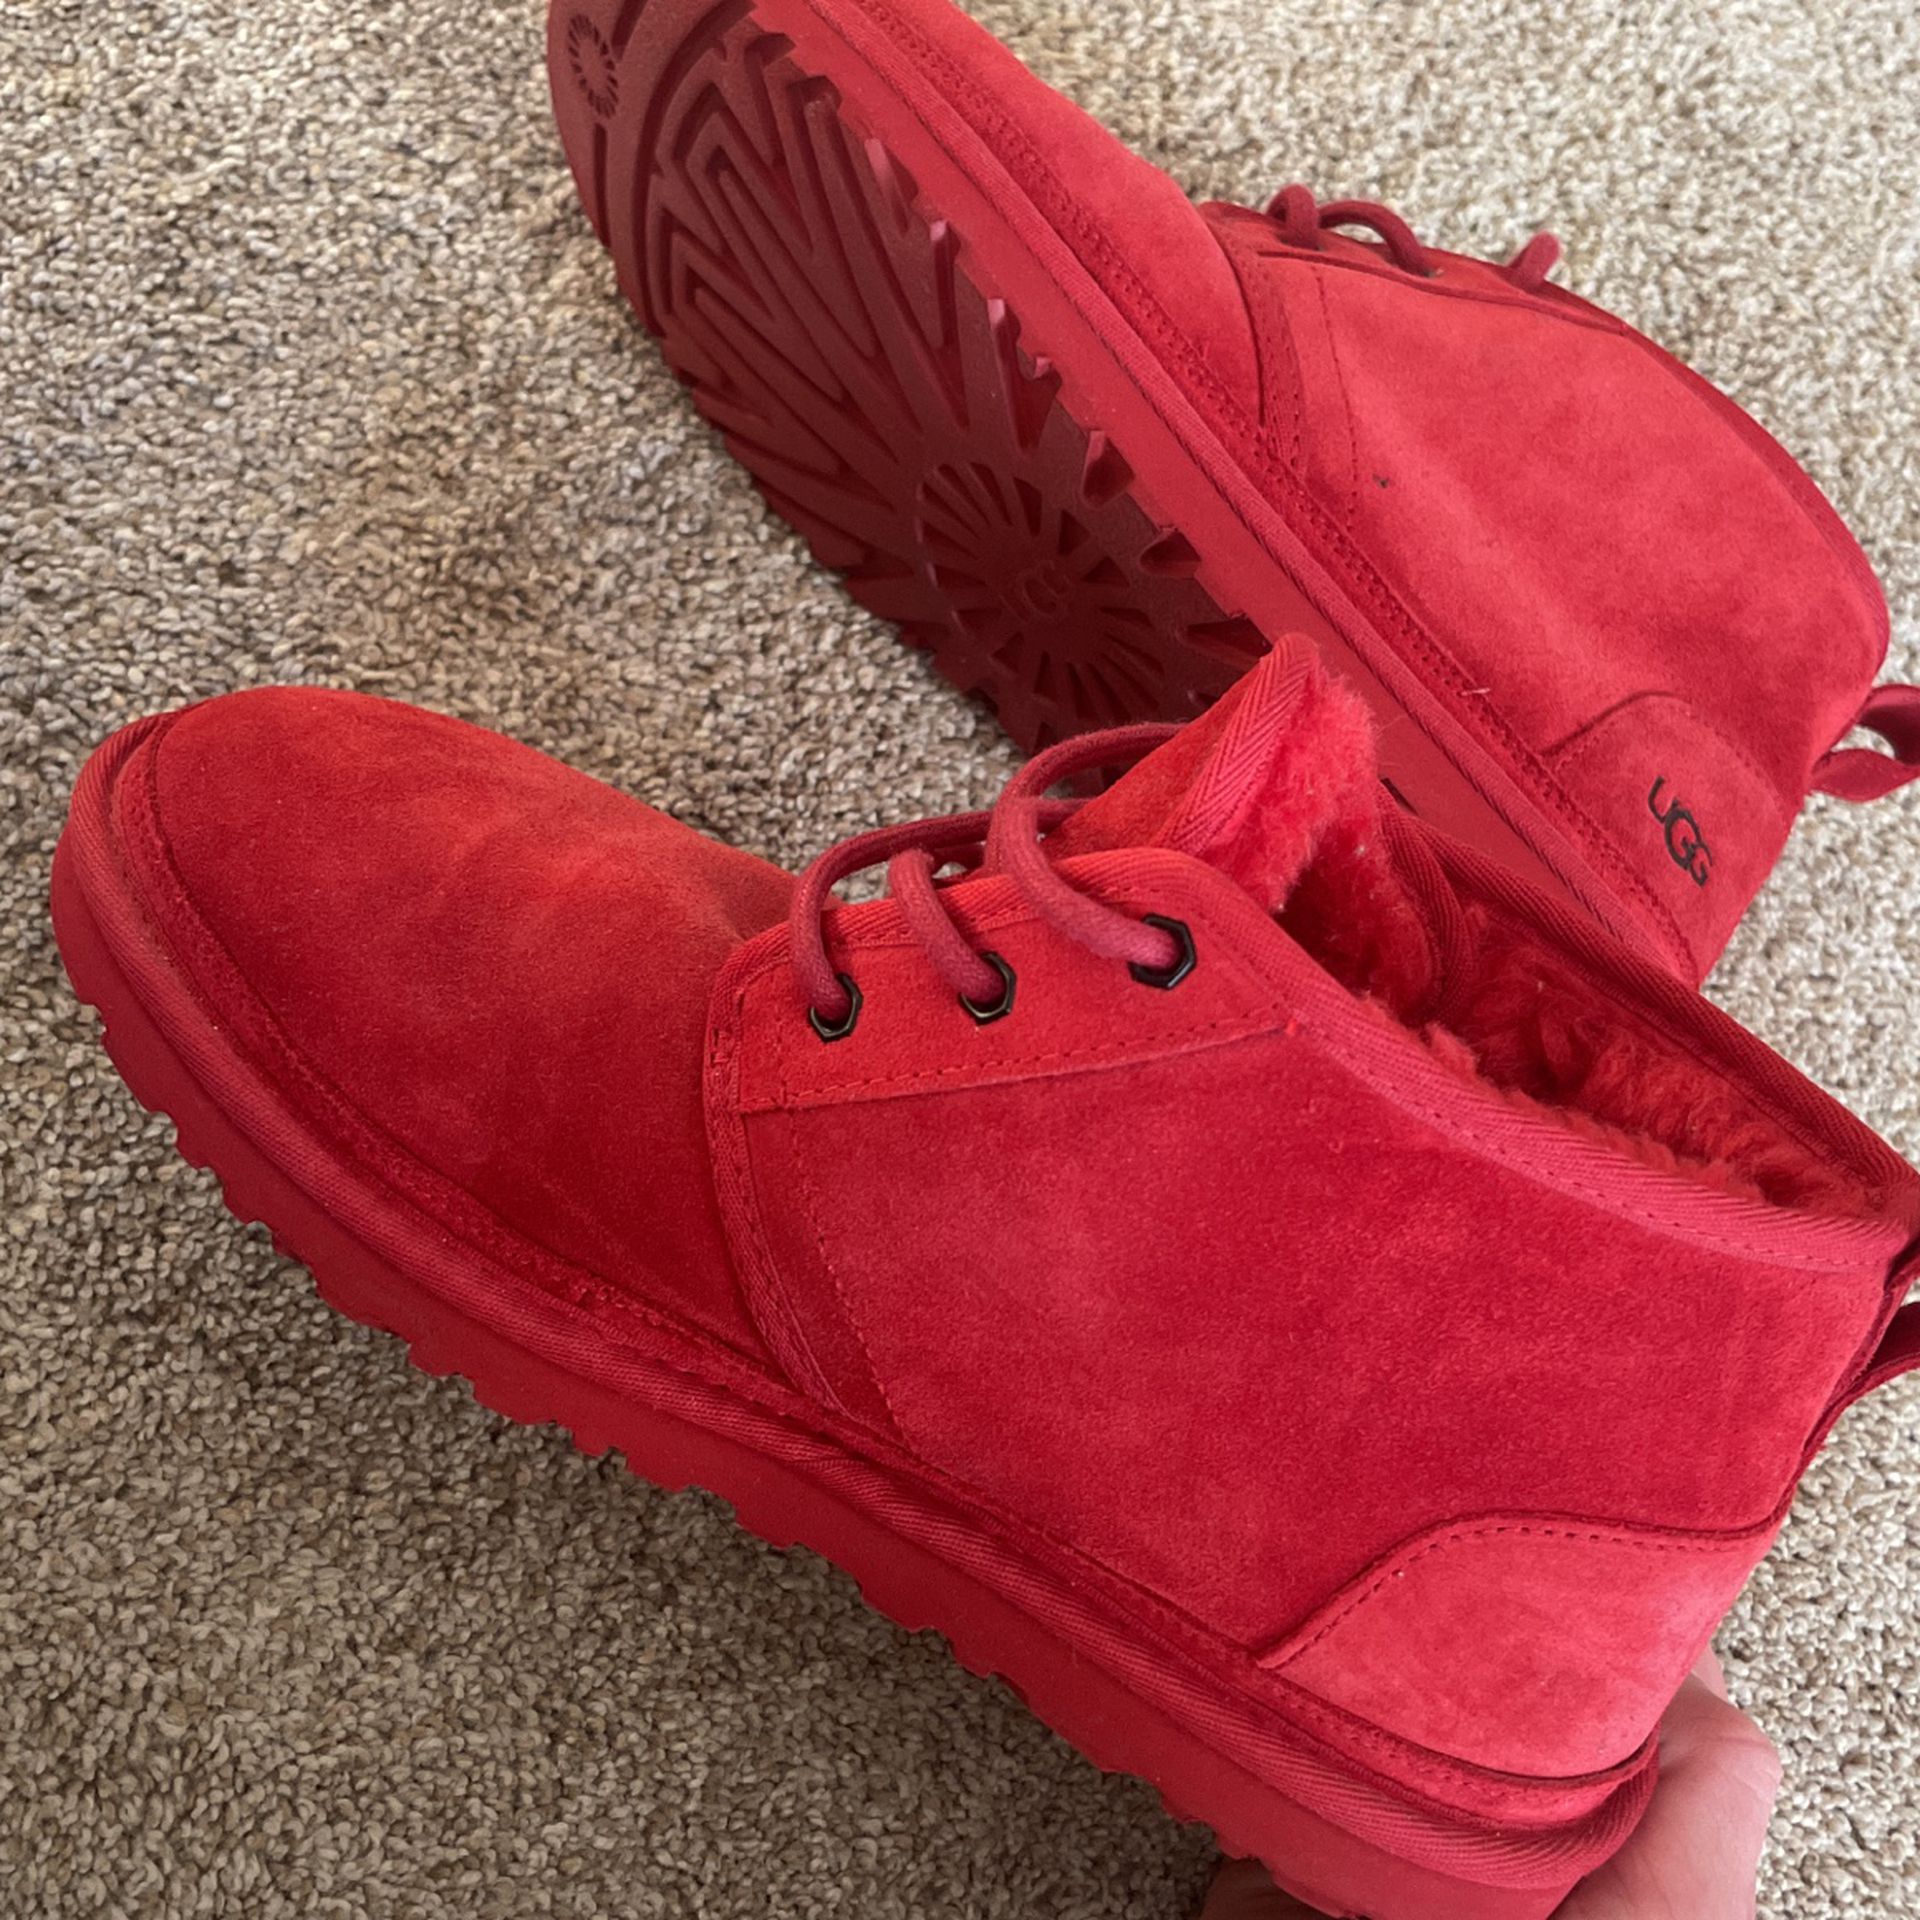 Men’s Ugh Boots All Red Size 9